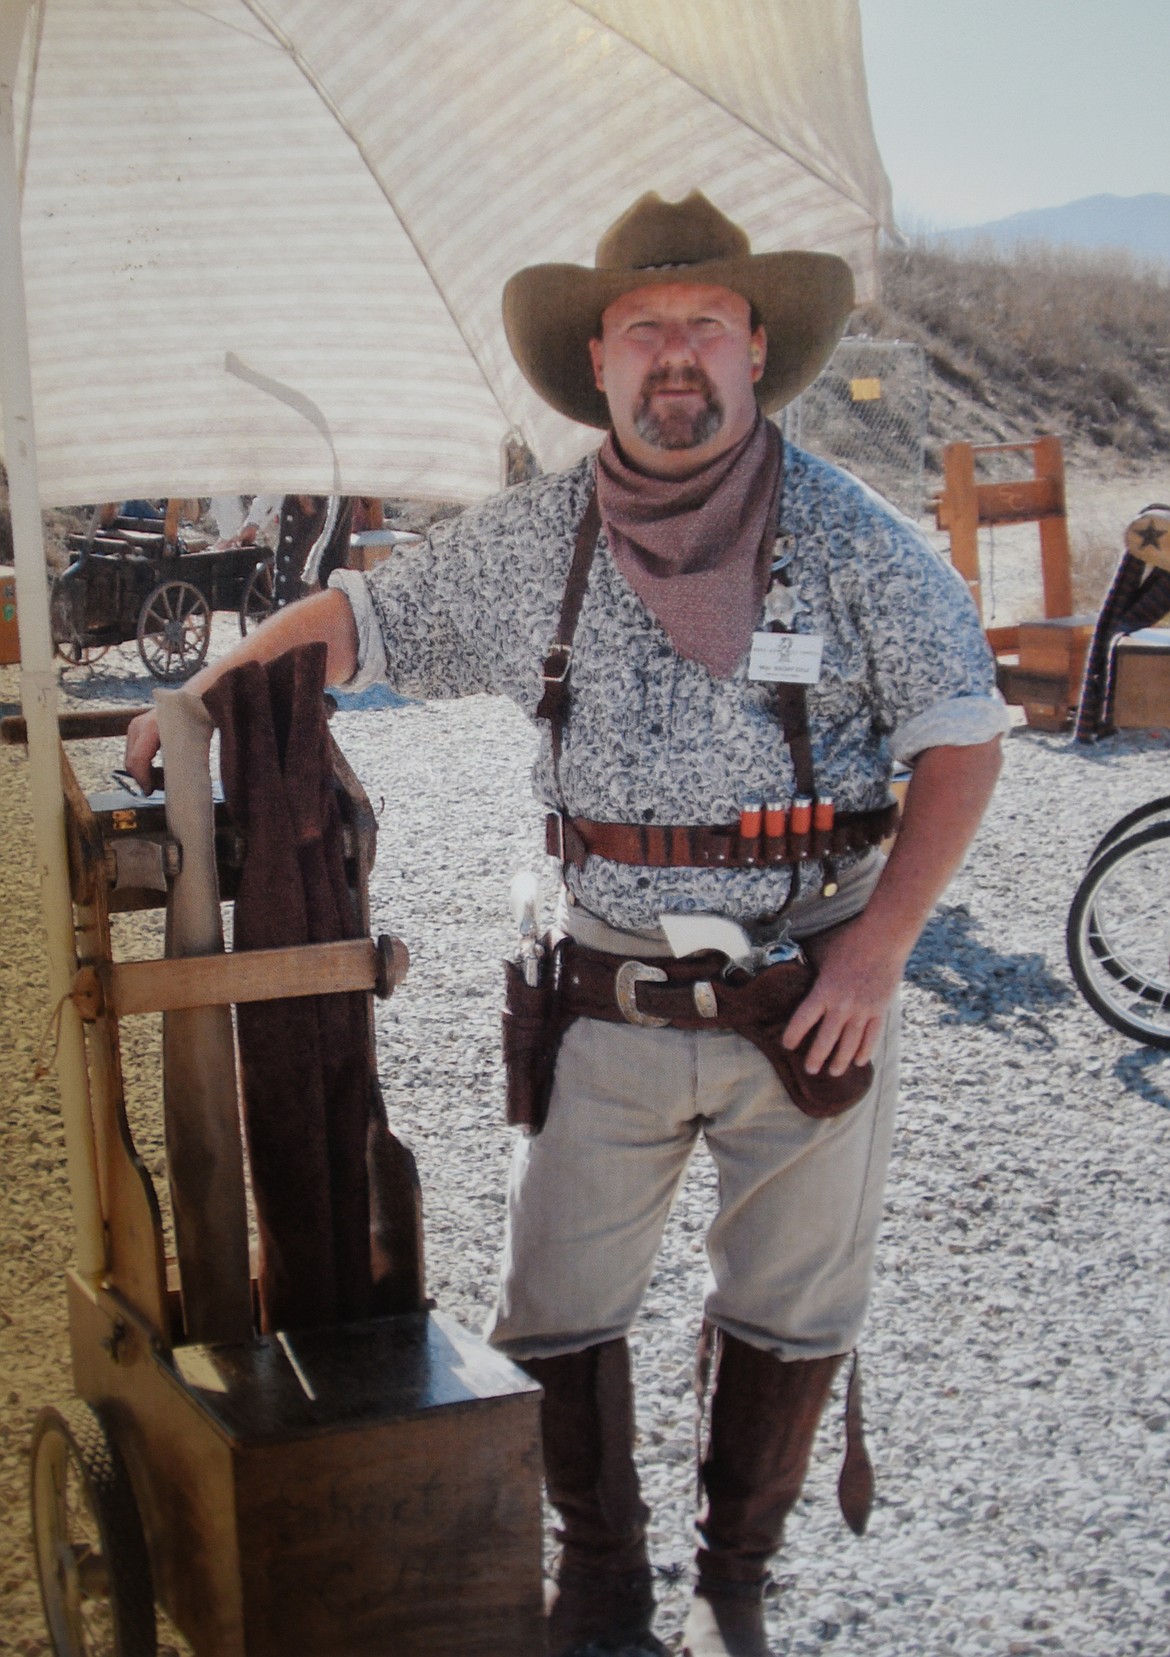 Richard Cheney during his days as a cowboy action shooter. (photo provided)